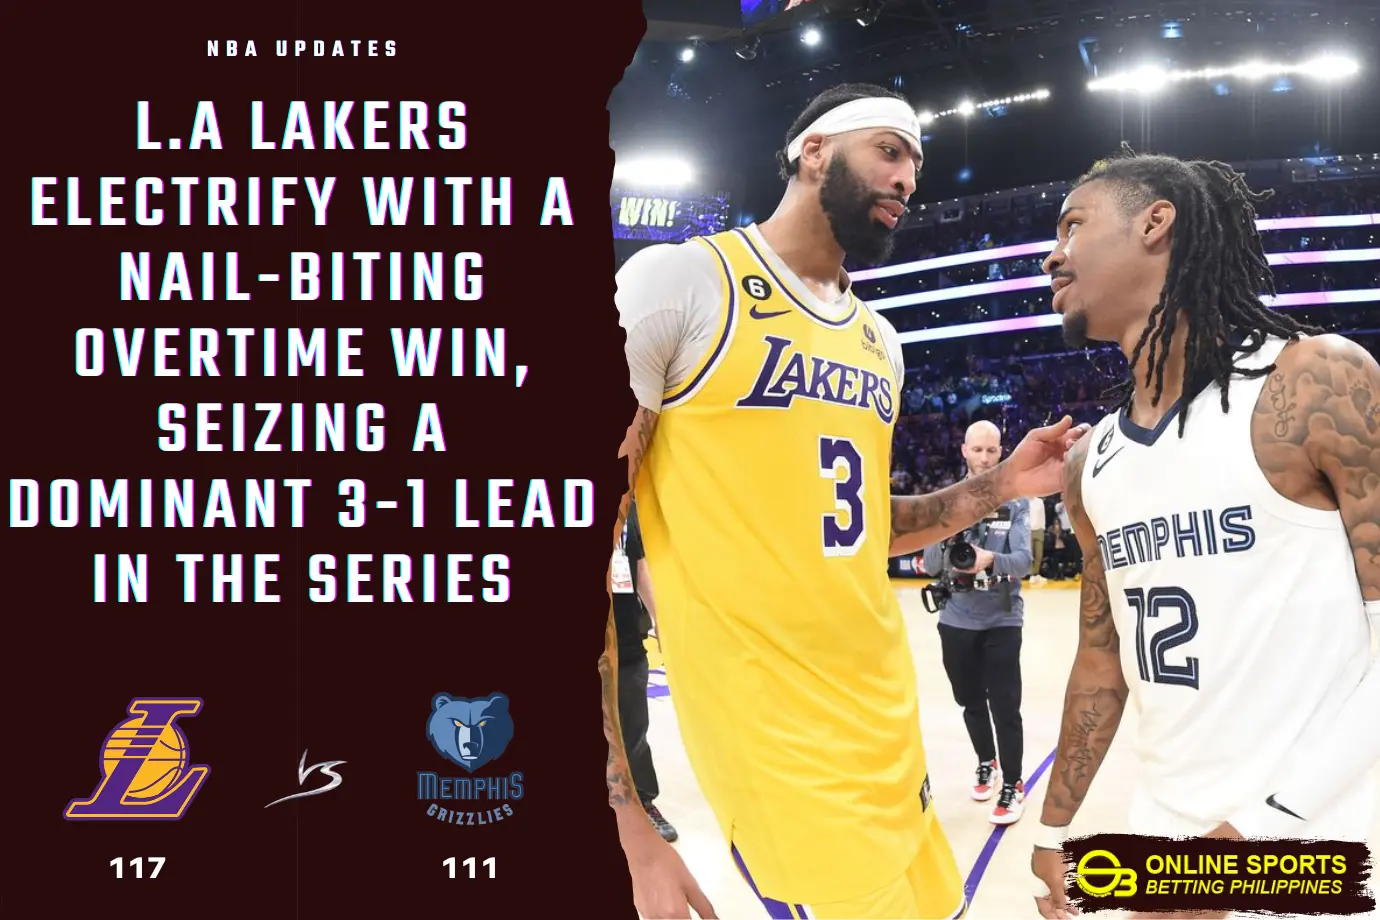 Los Angeles Lakers Electrify With a Nail-Biting Overtime Win, Seizing a Dominant 3-1 Lead in the Series